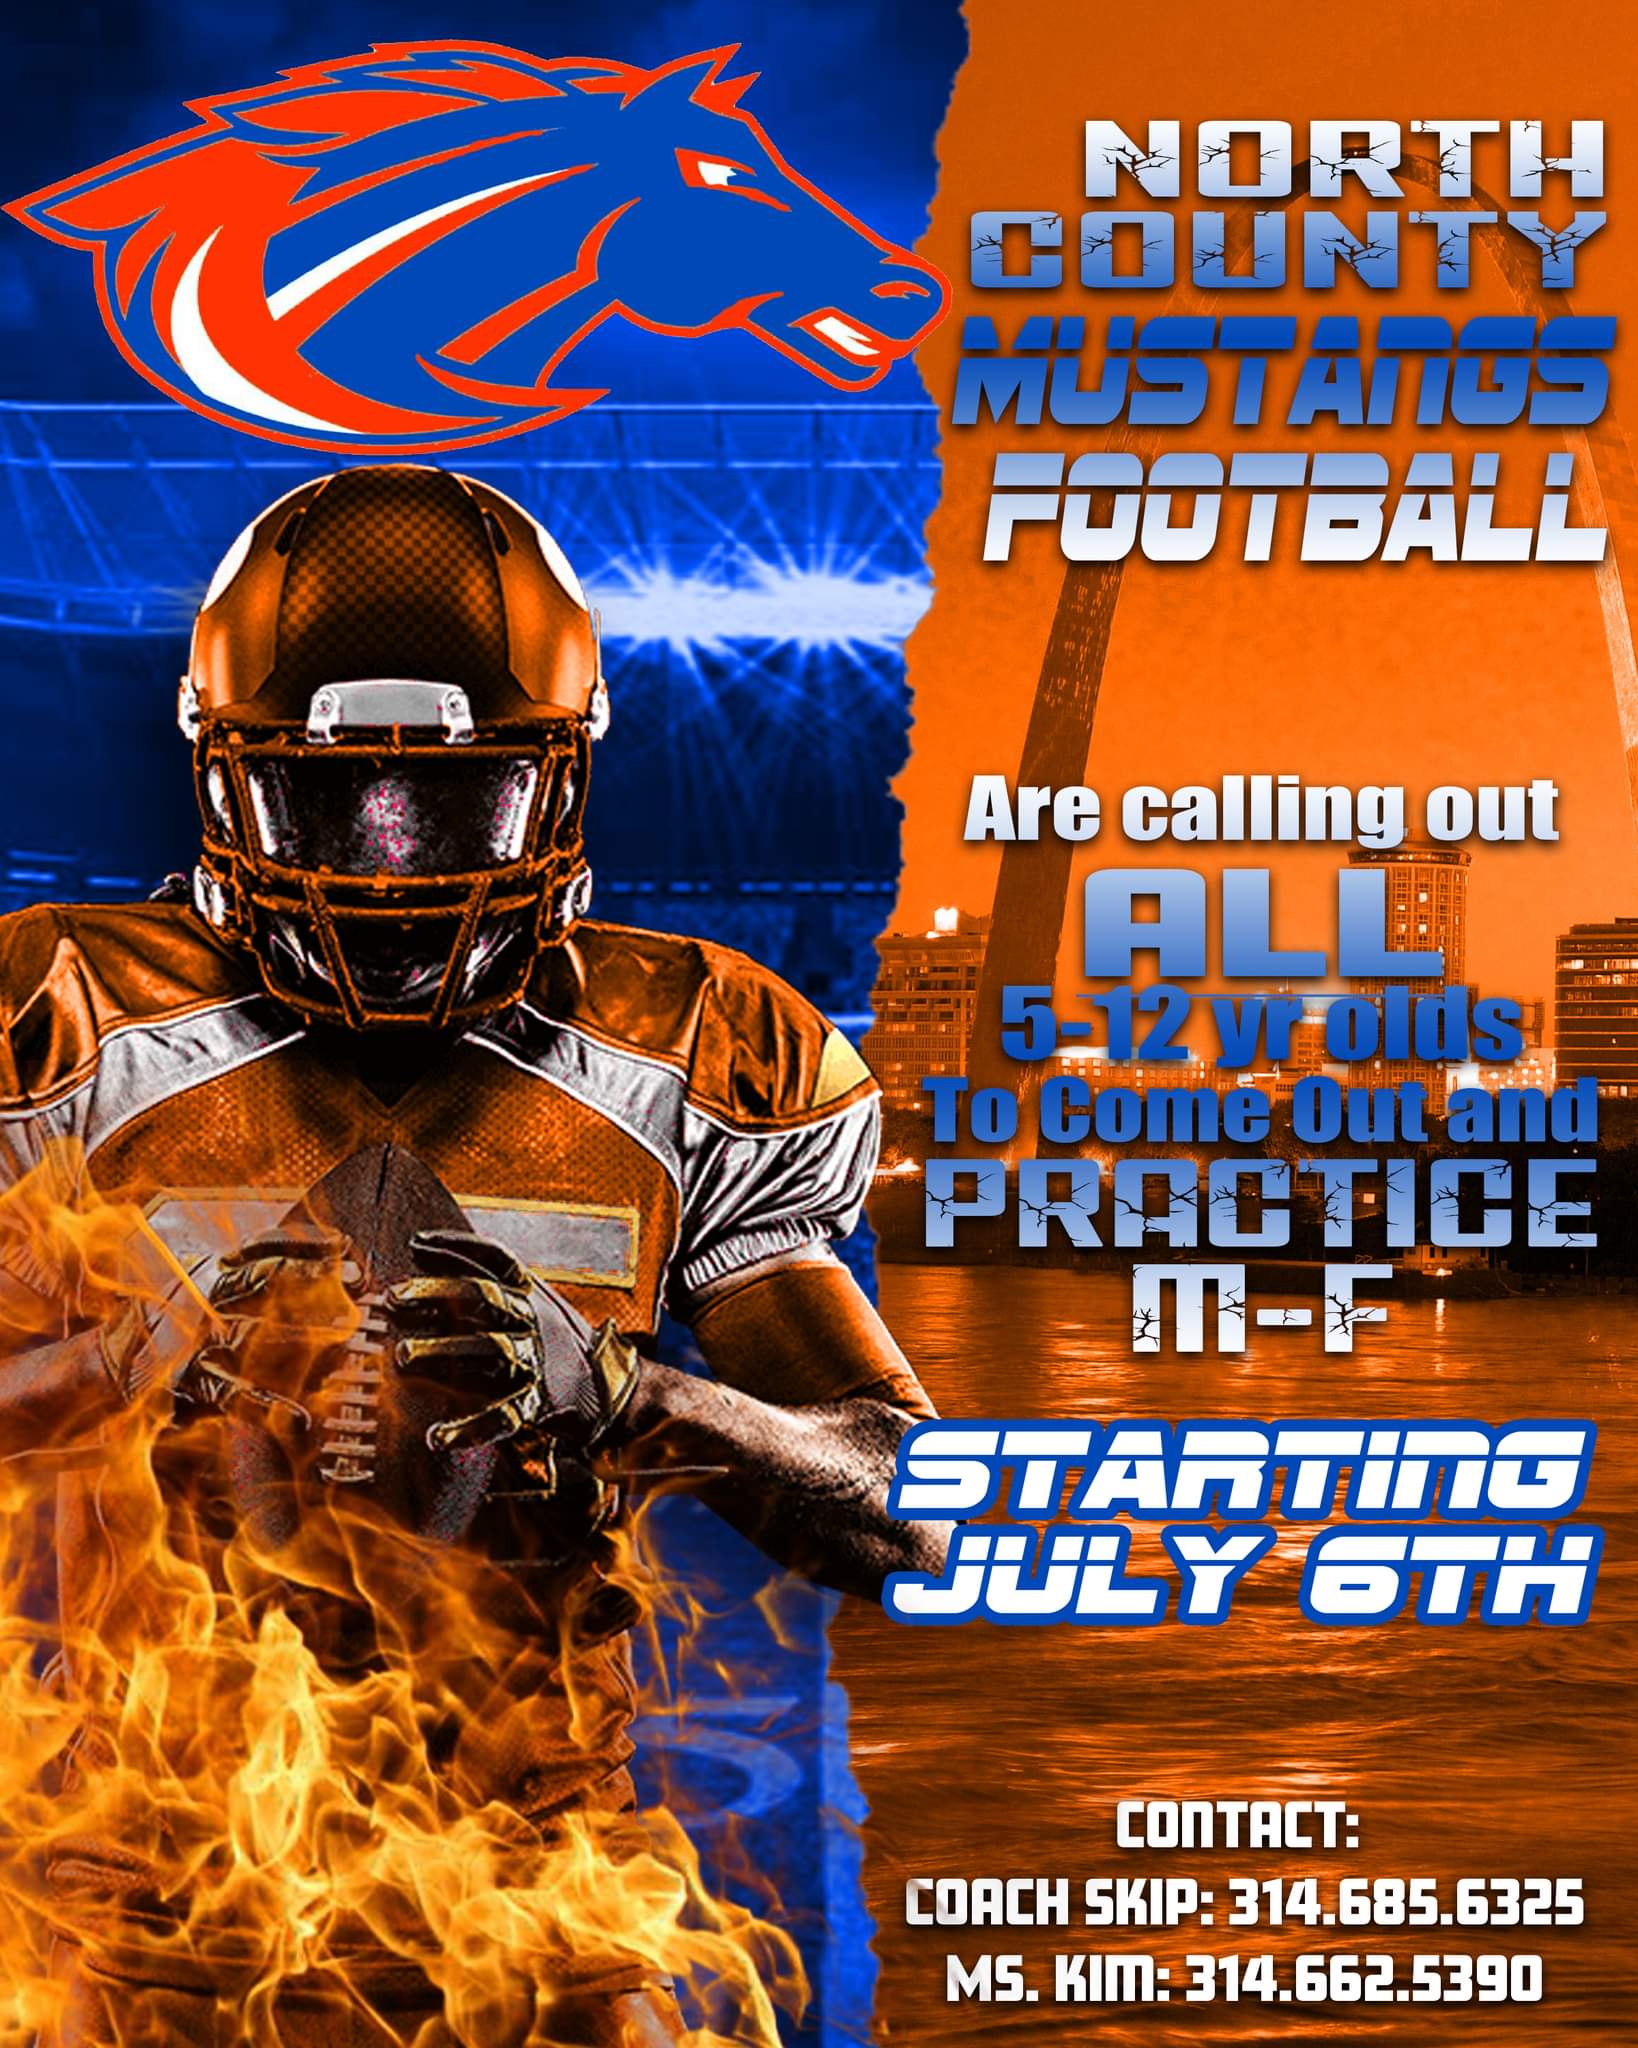 north county mustangs football starting july 6th contact coach skip 314.685.6325